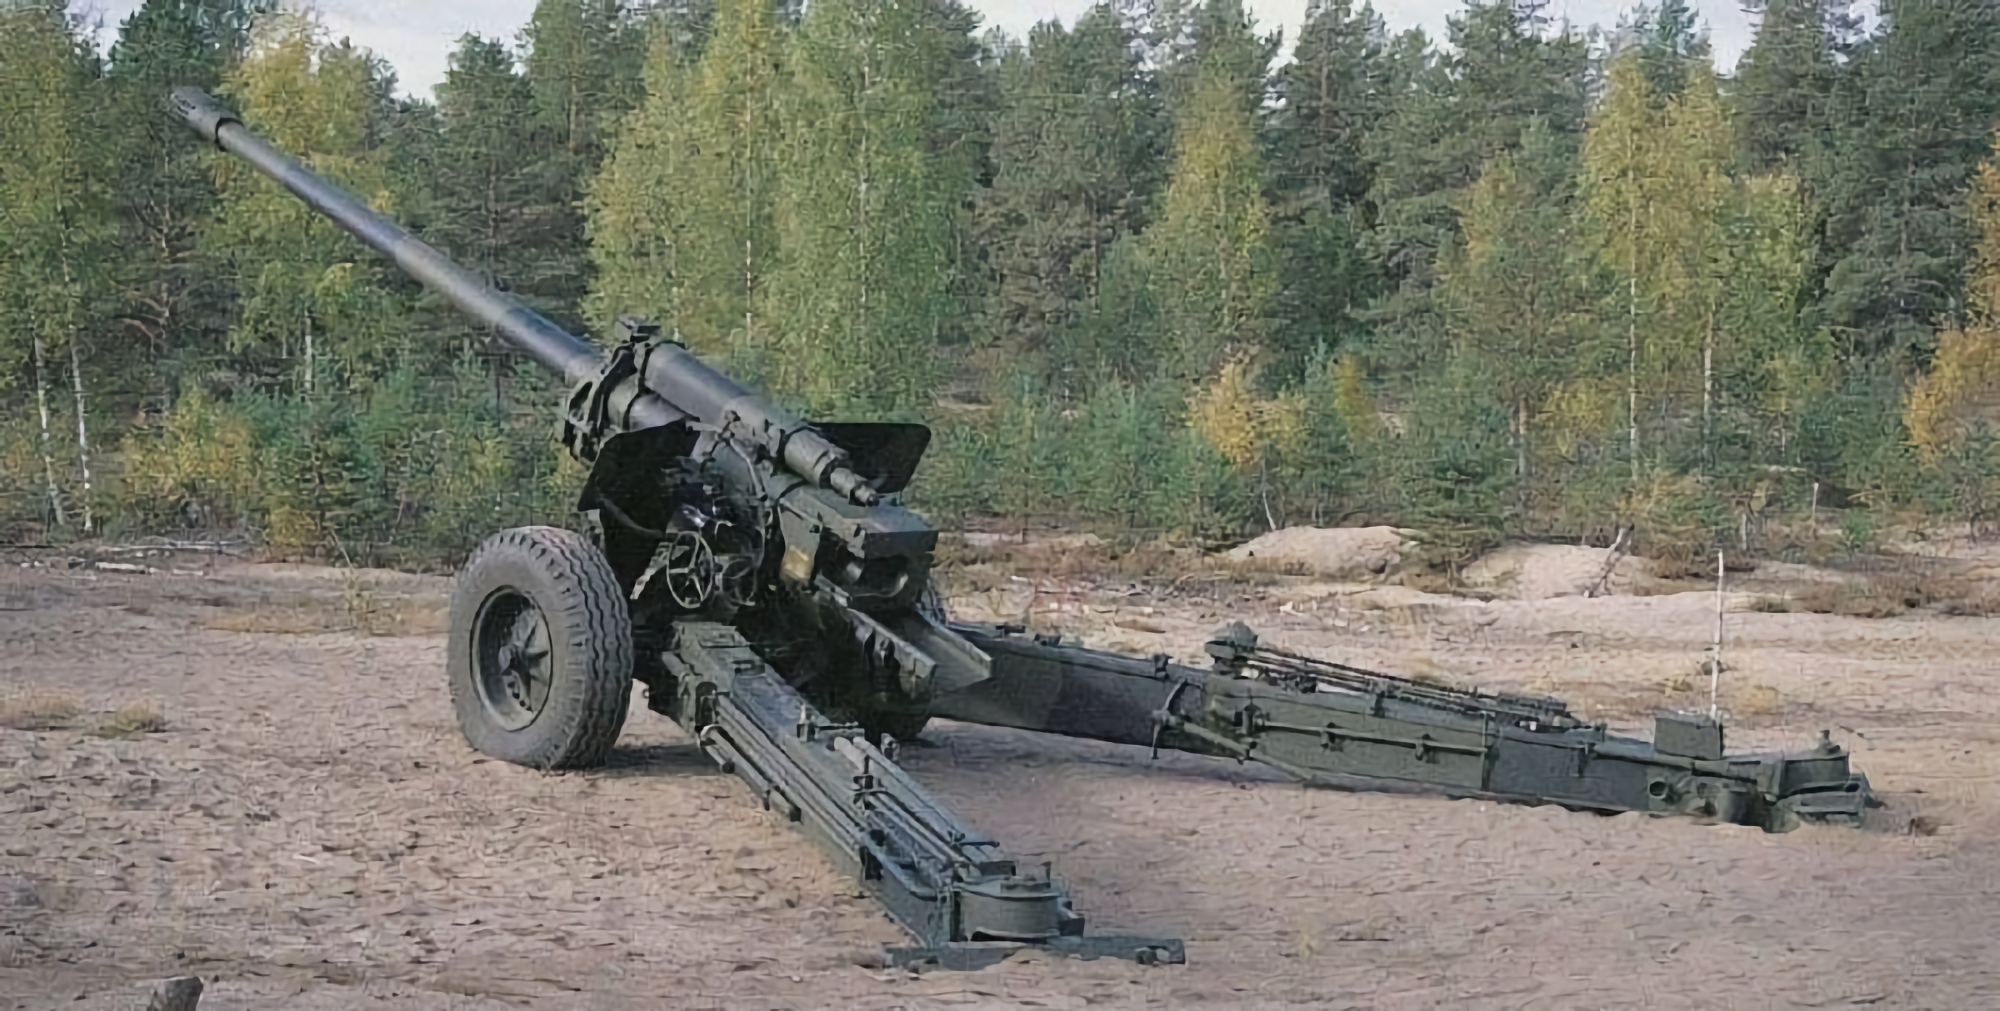 Finland transferred 130 mm M-46 howitzers to the Armed Forces of Ukraine